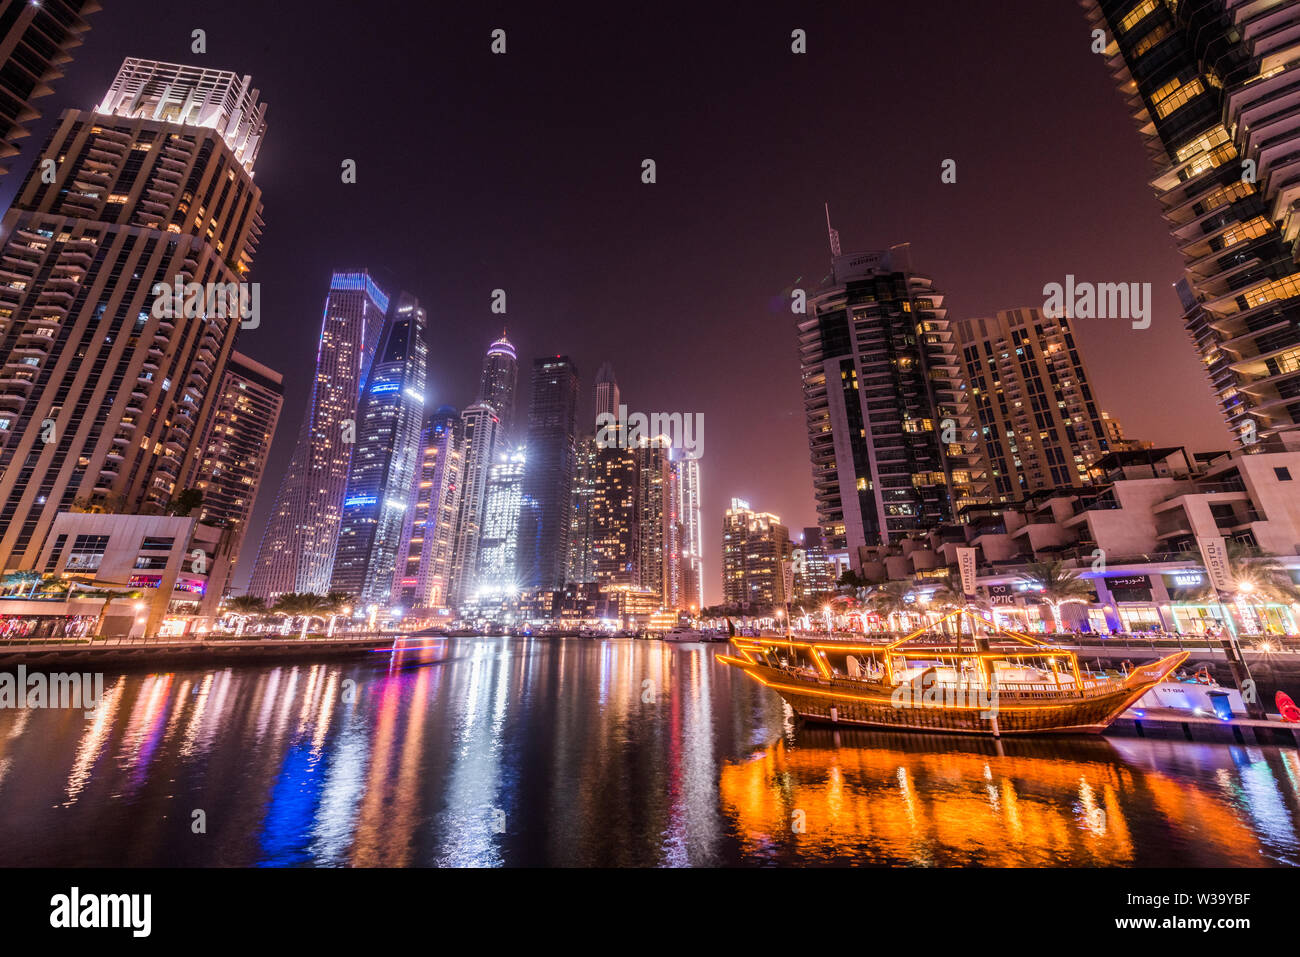 Buildings, lights, water, boat, skyscrapers, palm trees, feelings, emotions. Spectacular images. Dream landscapes. A fascinating city. Night in town. Stock Photo